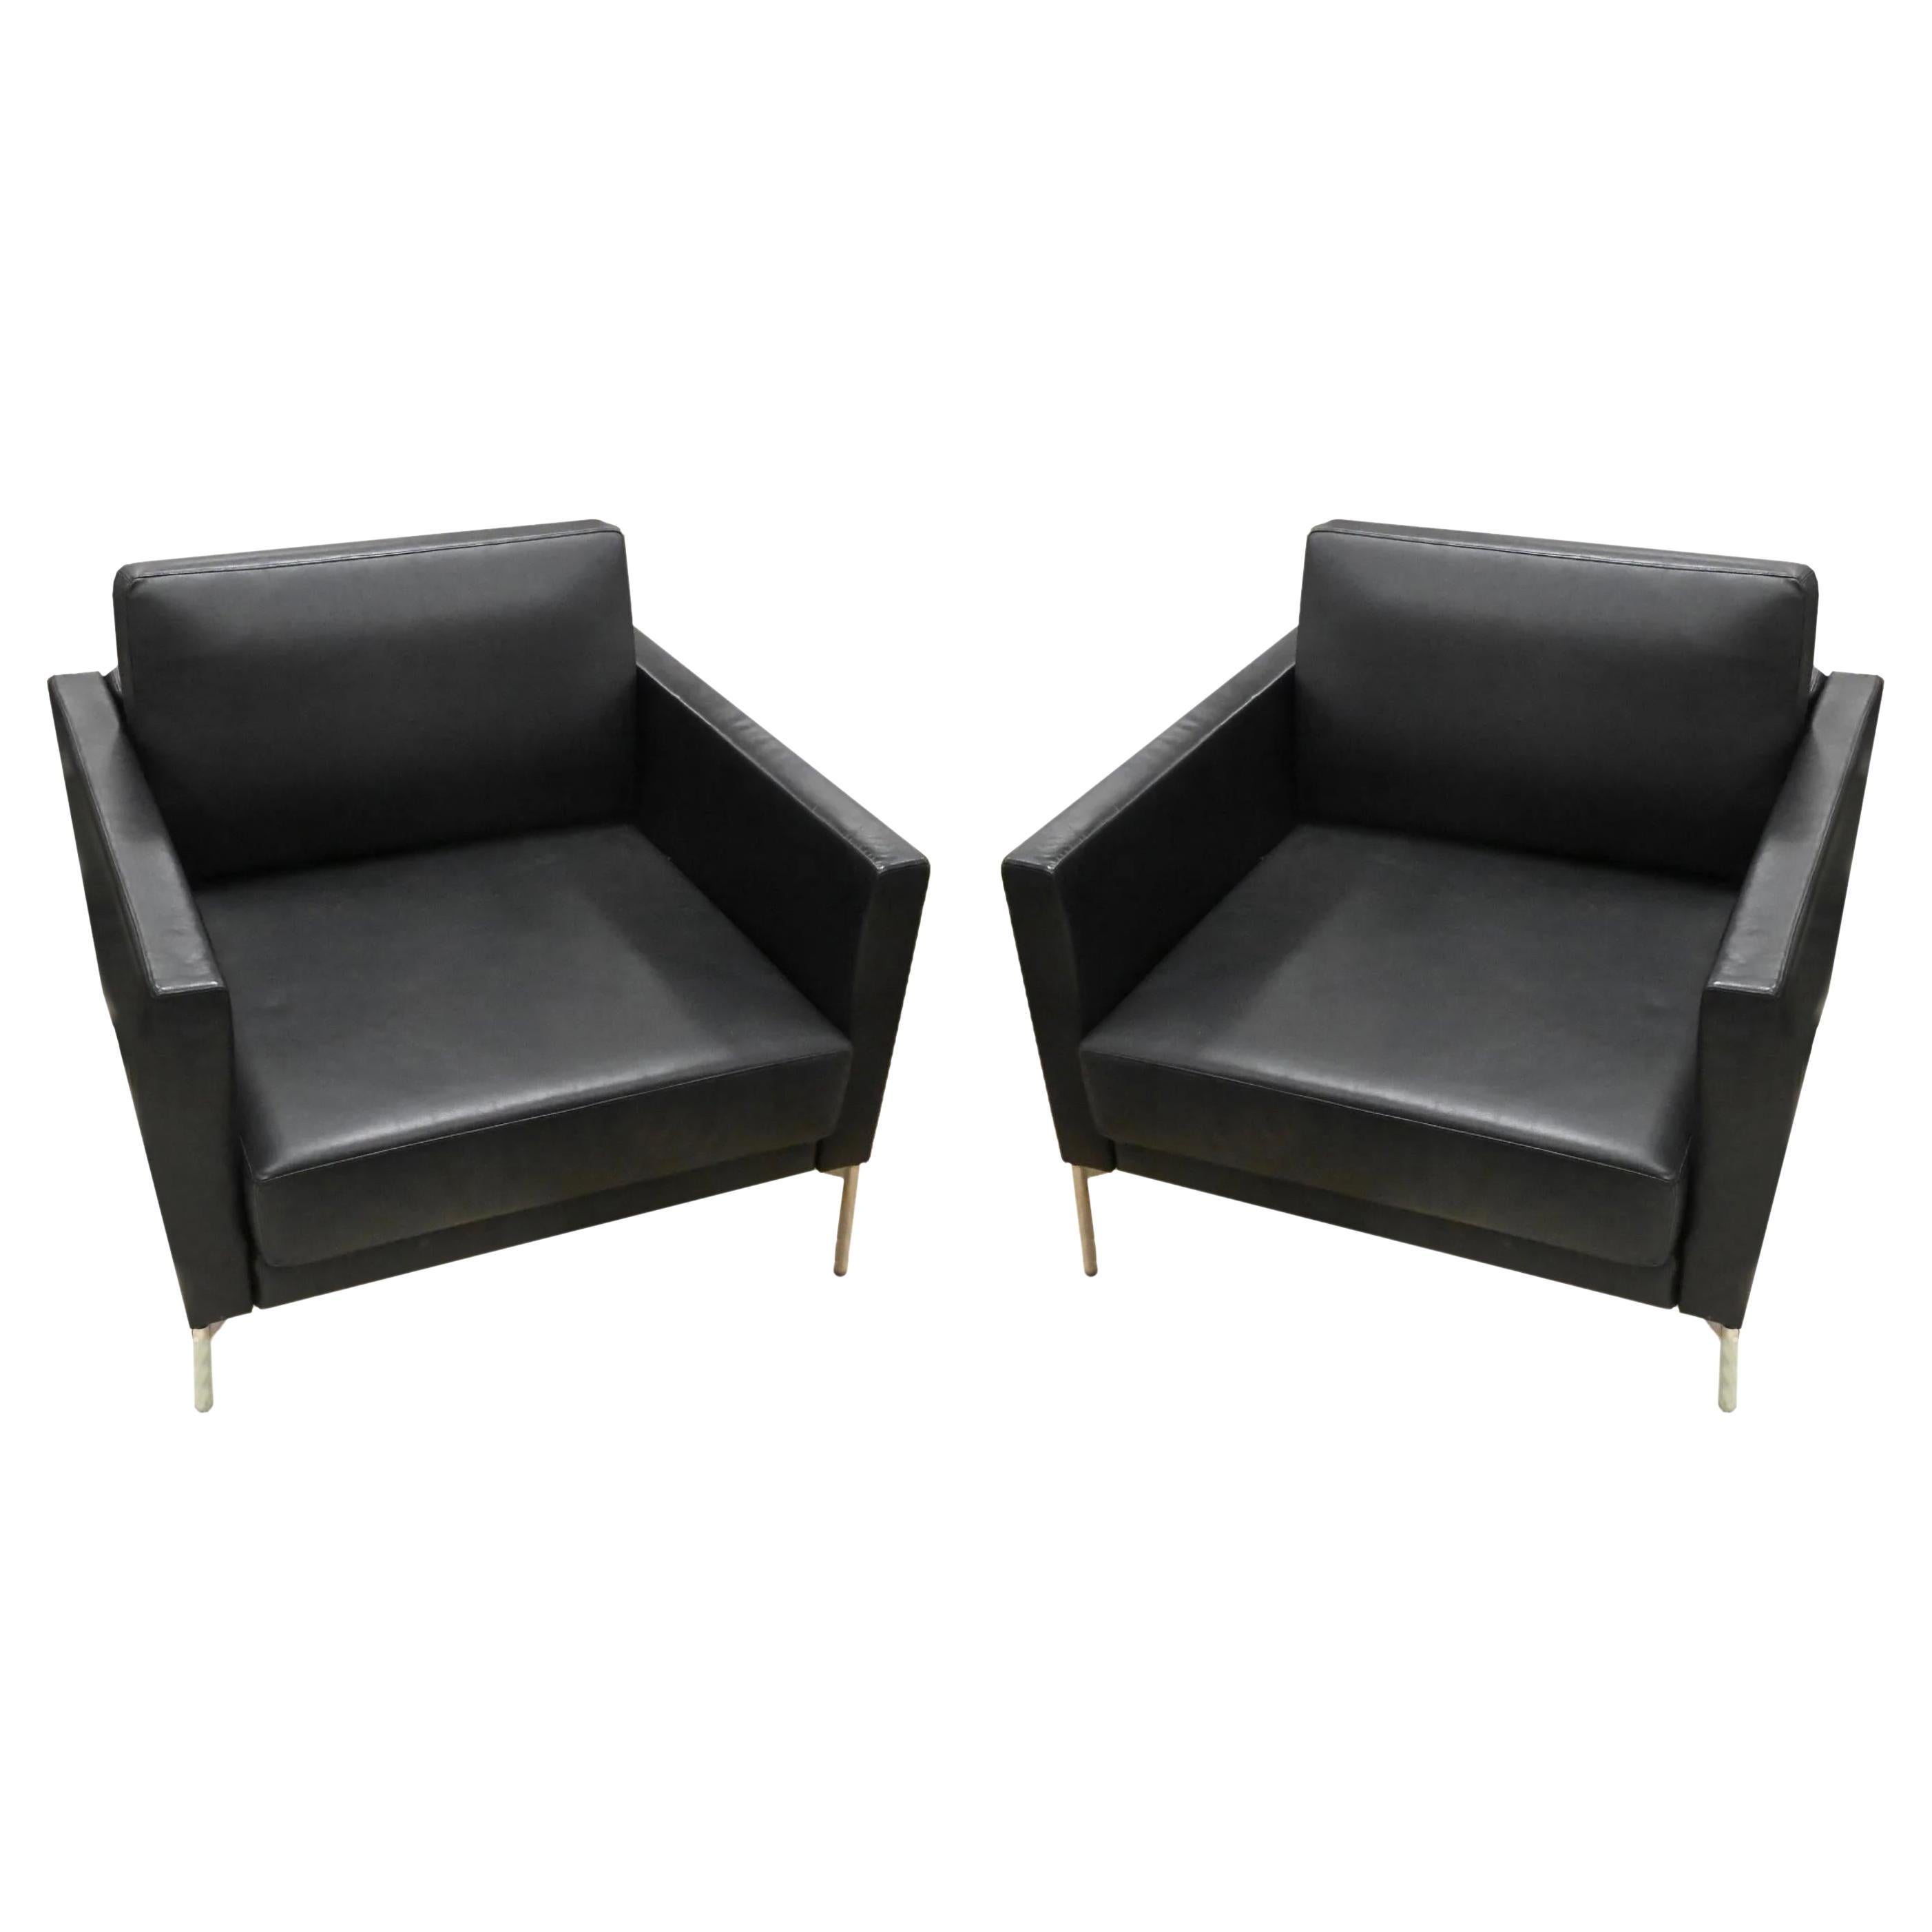 American Pair of Modern Piero Lissoni for Knoll Divina Club Lounge Chairs Black Leather For Sale